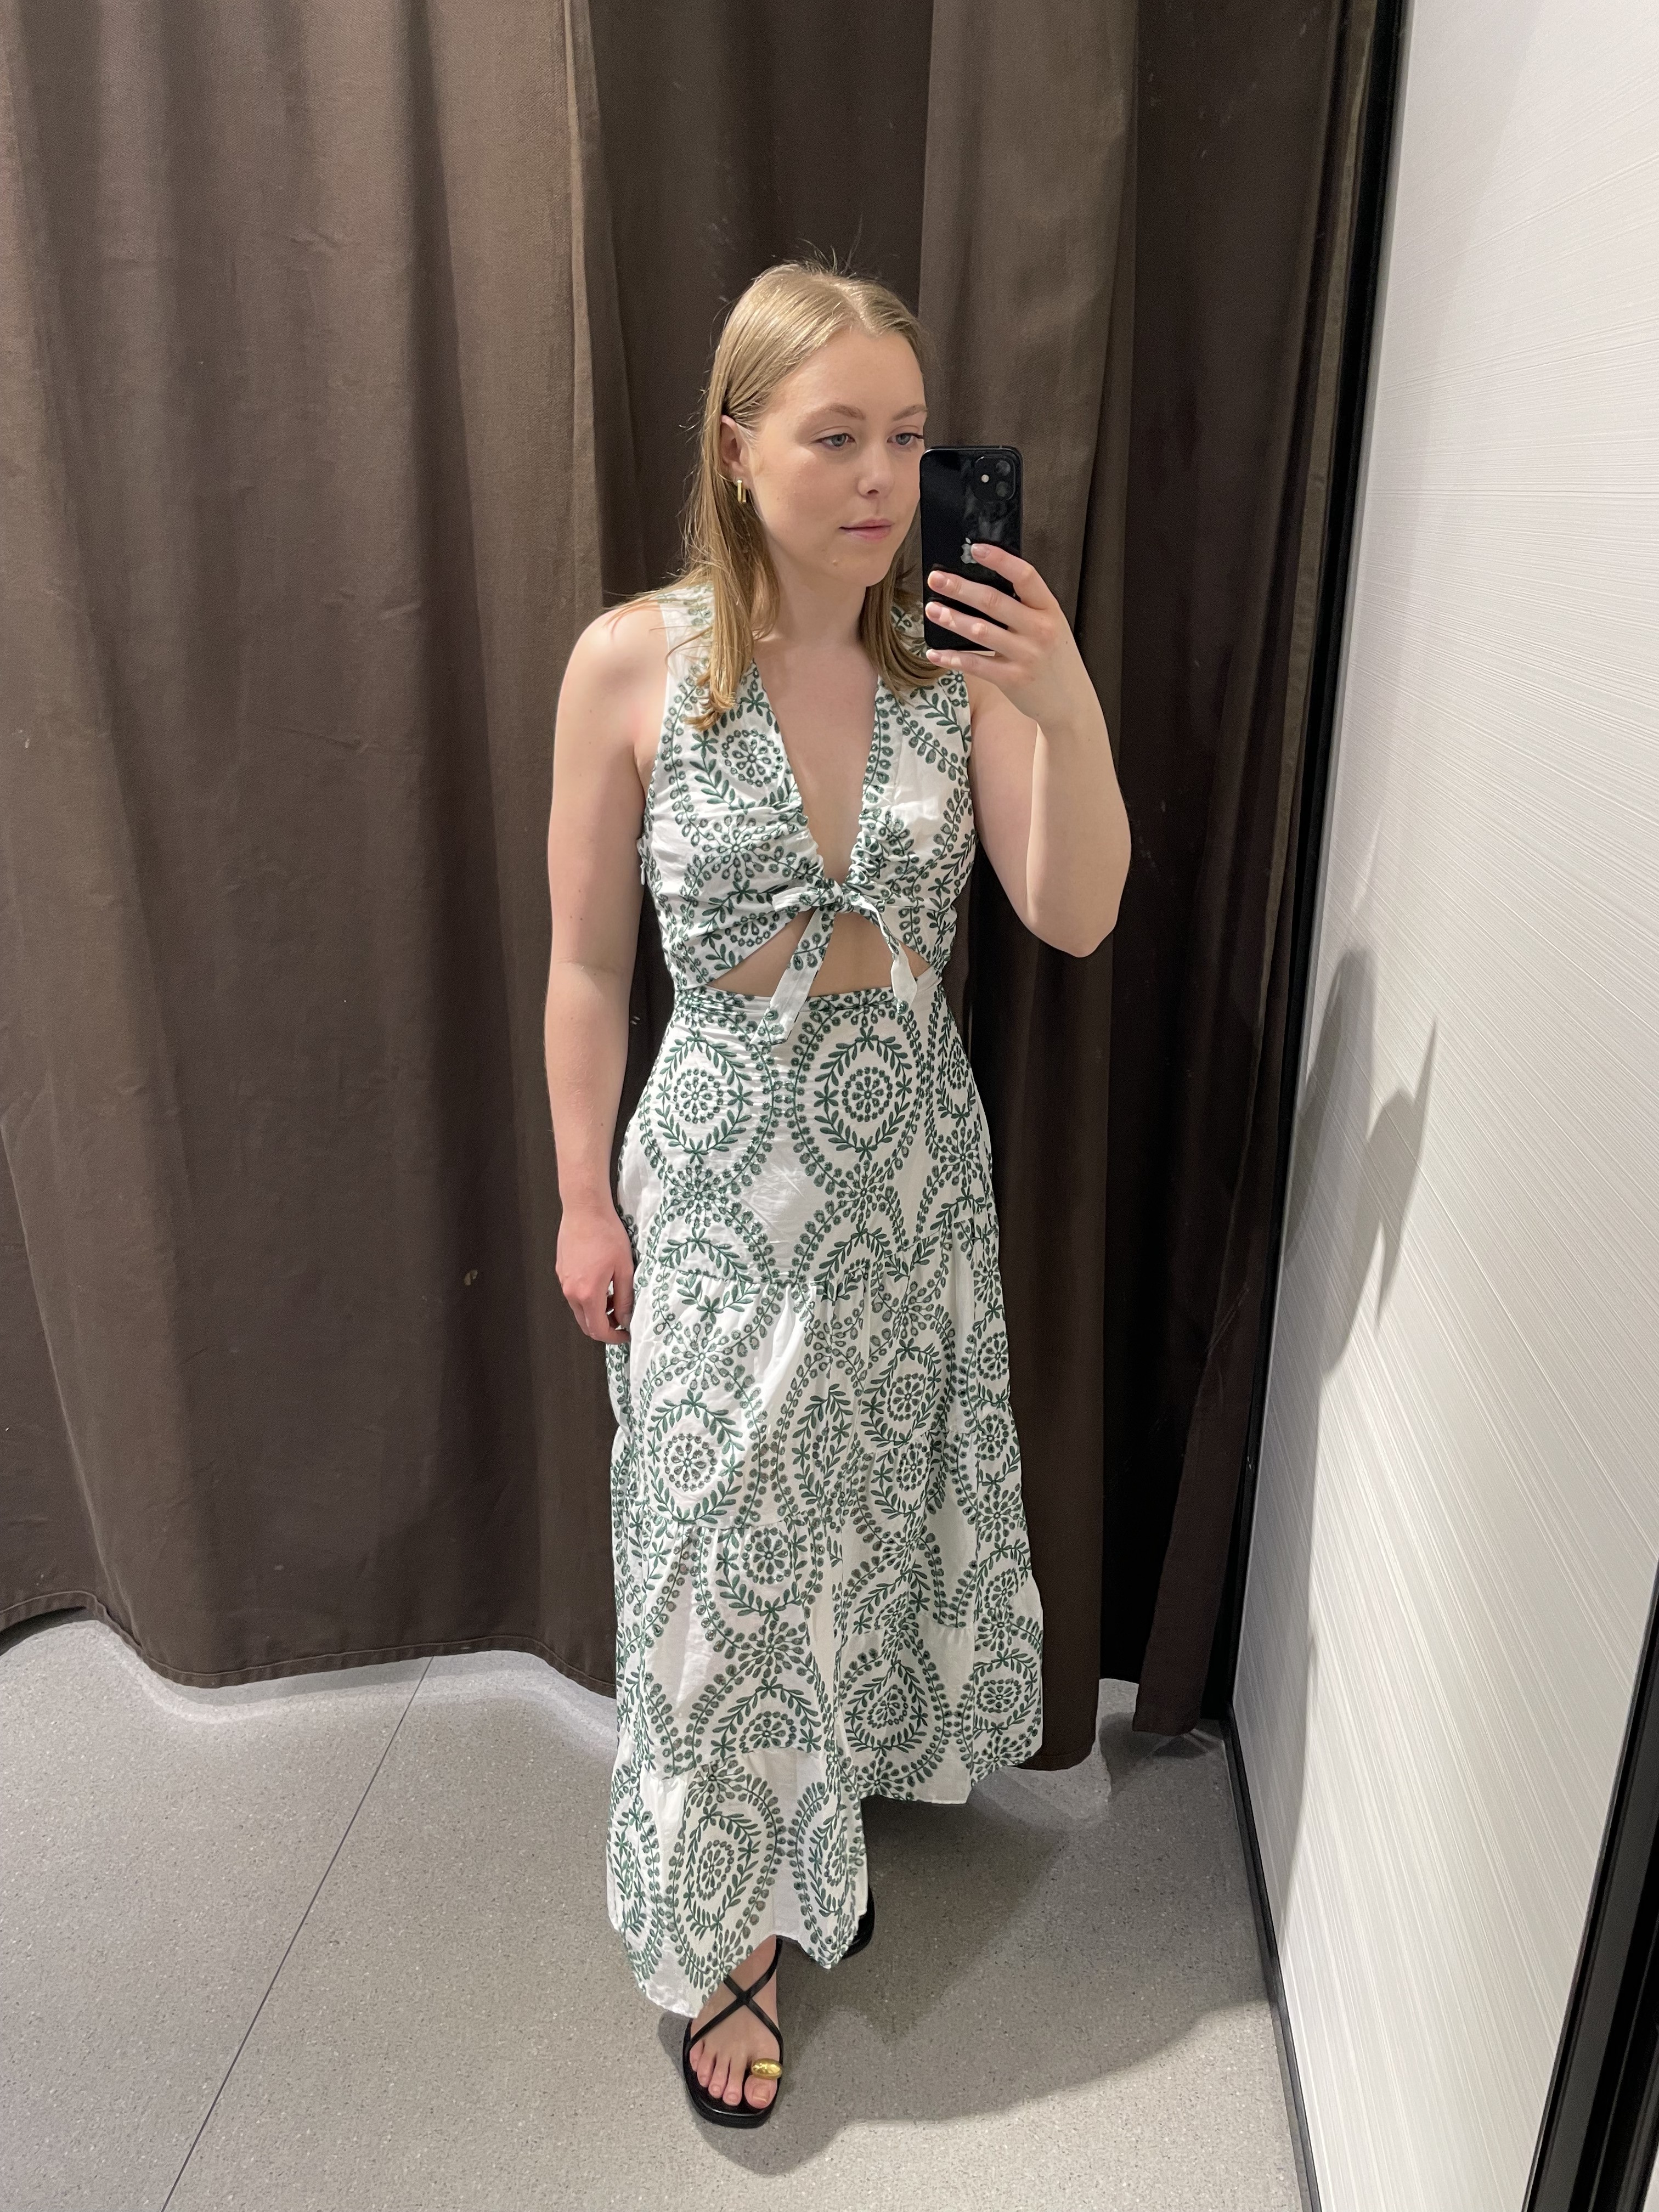 Woman in dressing room wears white dress with green embroidery